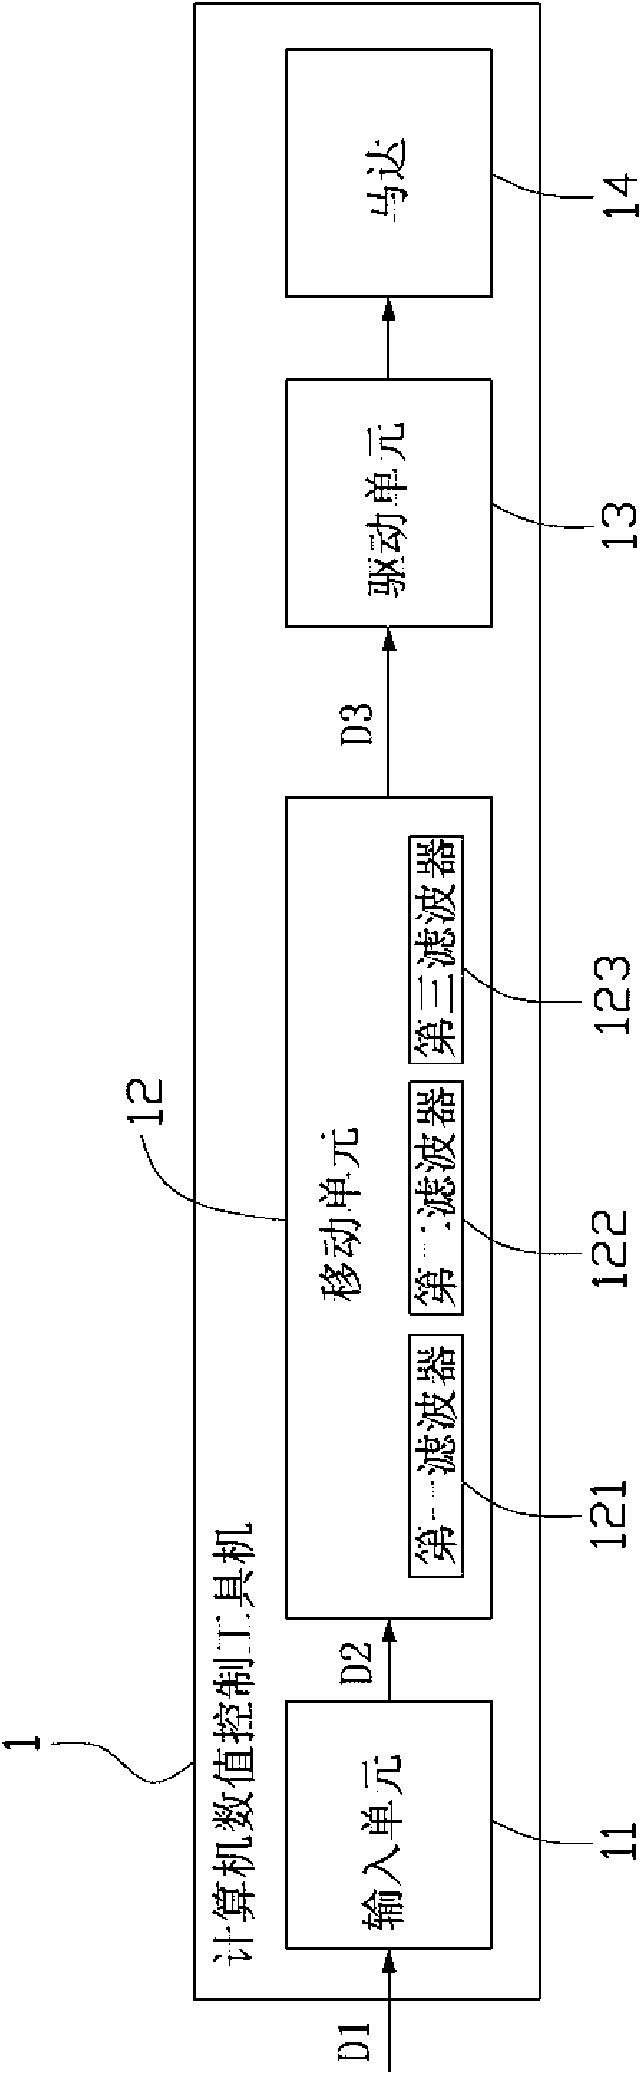 Computerized numerical control machine tool and acceleration-deceleration method thereof